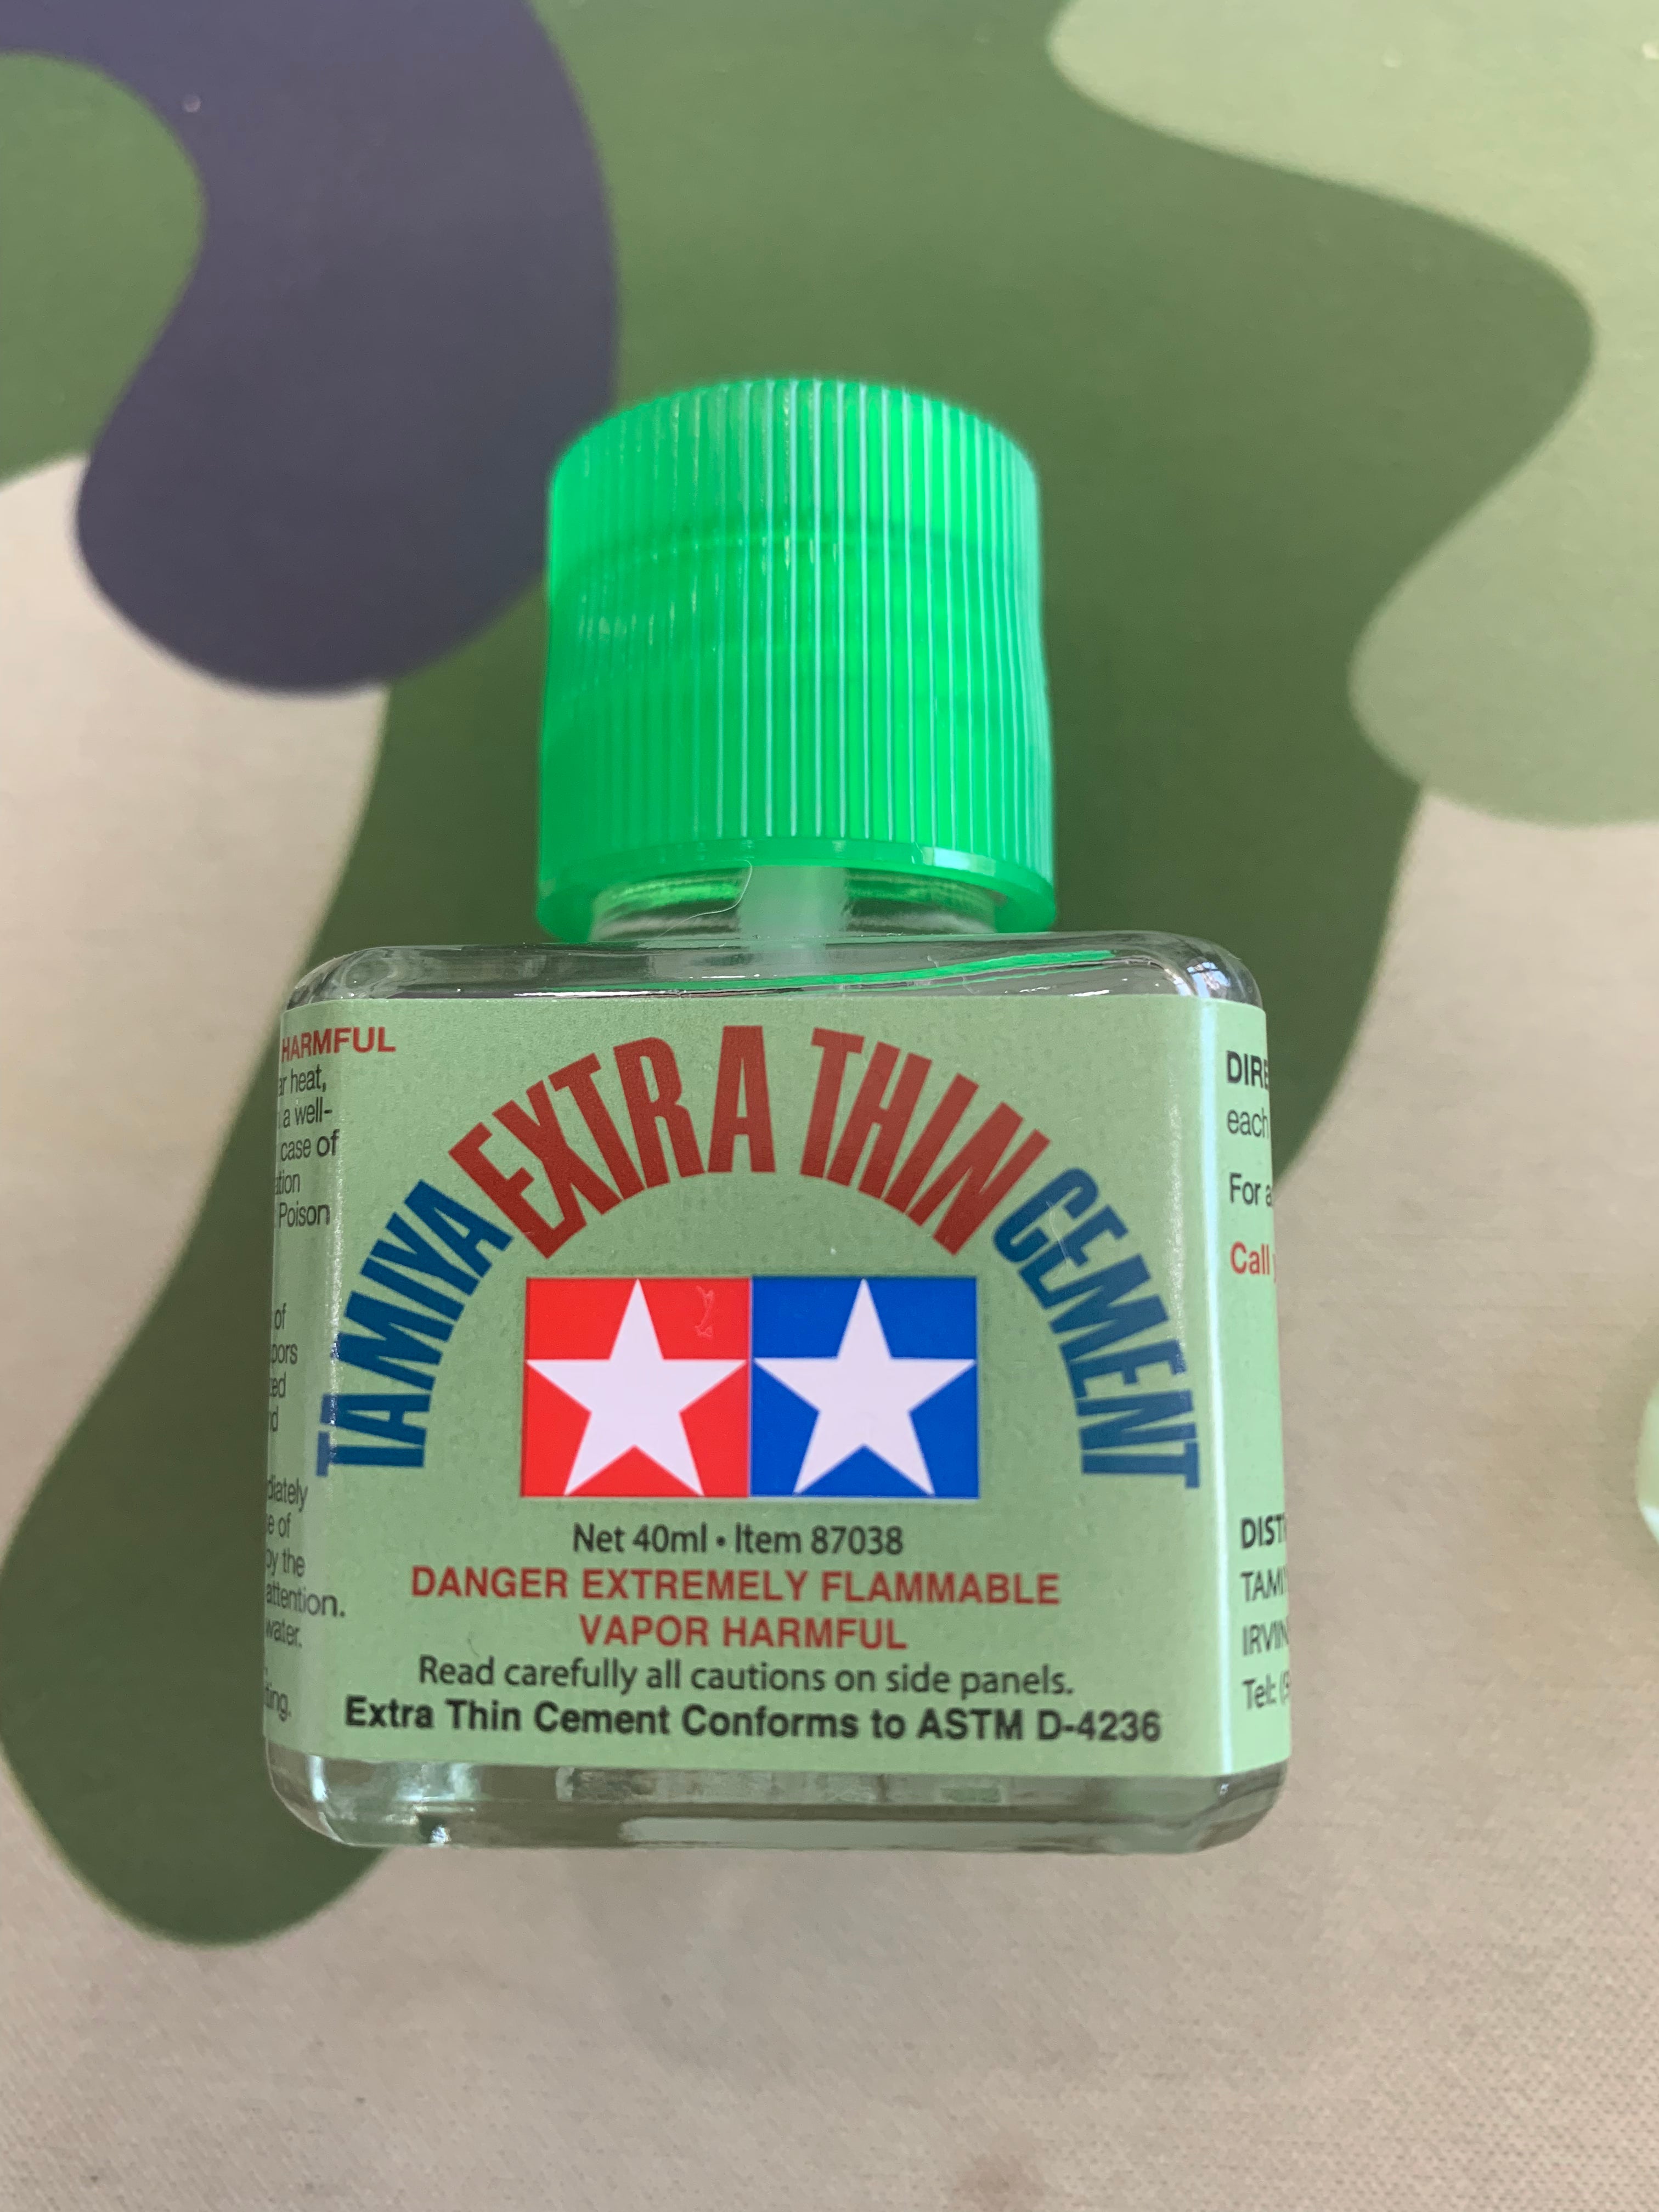 Supernova Studio - Various Tamiya Cement available at Supernova Studio! 𝐓𝐚𝐦𝐢𝐲𝐚  𝐂𝐞𝐦𝐞𝐧𝐭 𝐰𝐢𝐭𝐡 𝐁𝐫𝐮𝐬𝐡 (𝟐𝟎𝐦𝐥): A liquid type glue. Will work  for strengthening the Dangun Racer's body. In the assembly of the